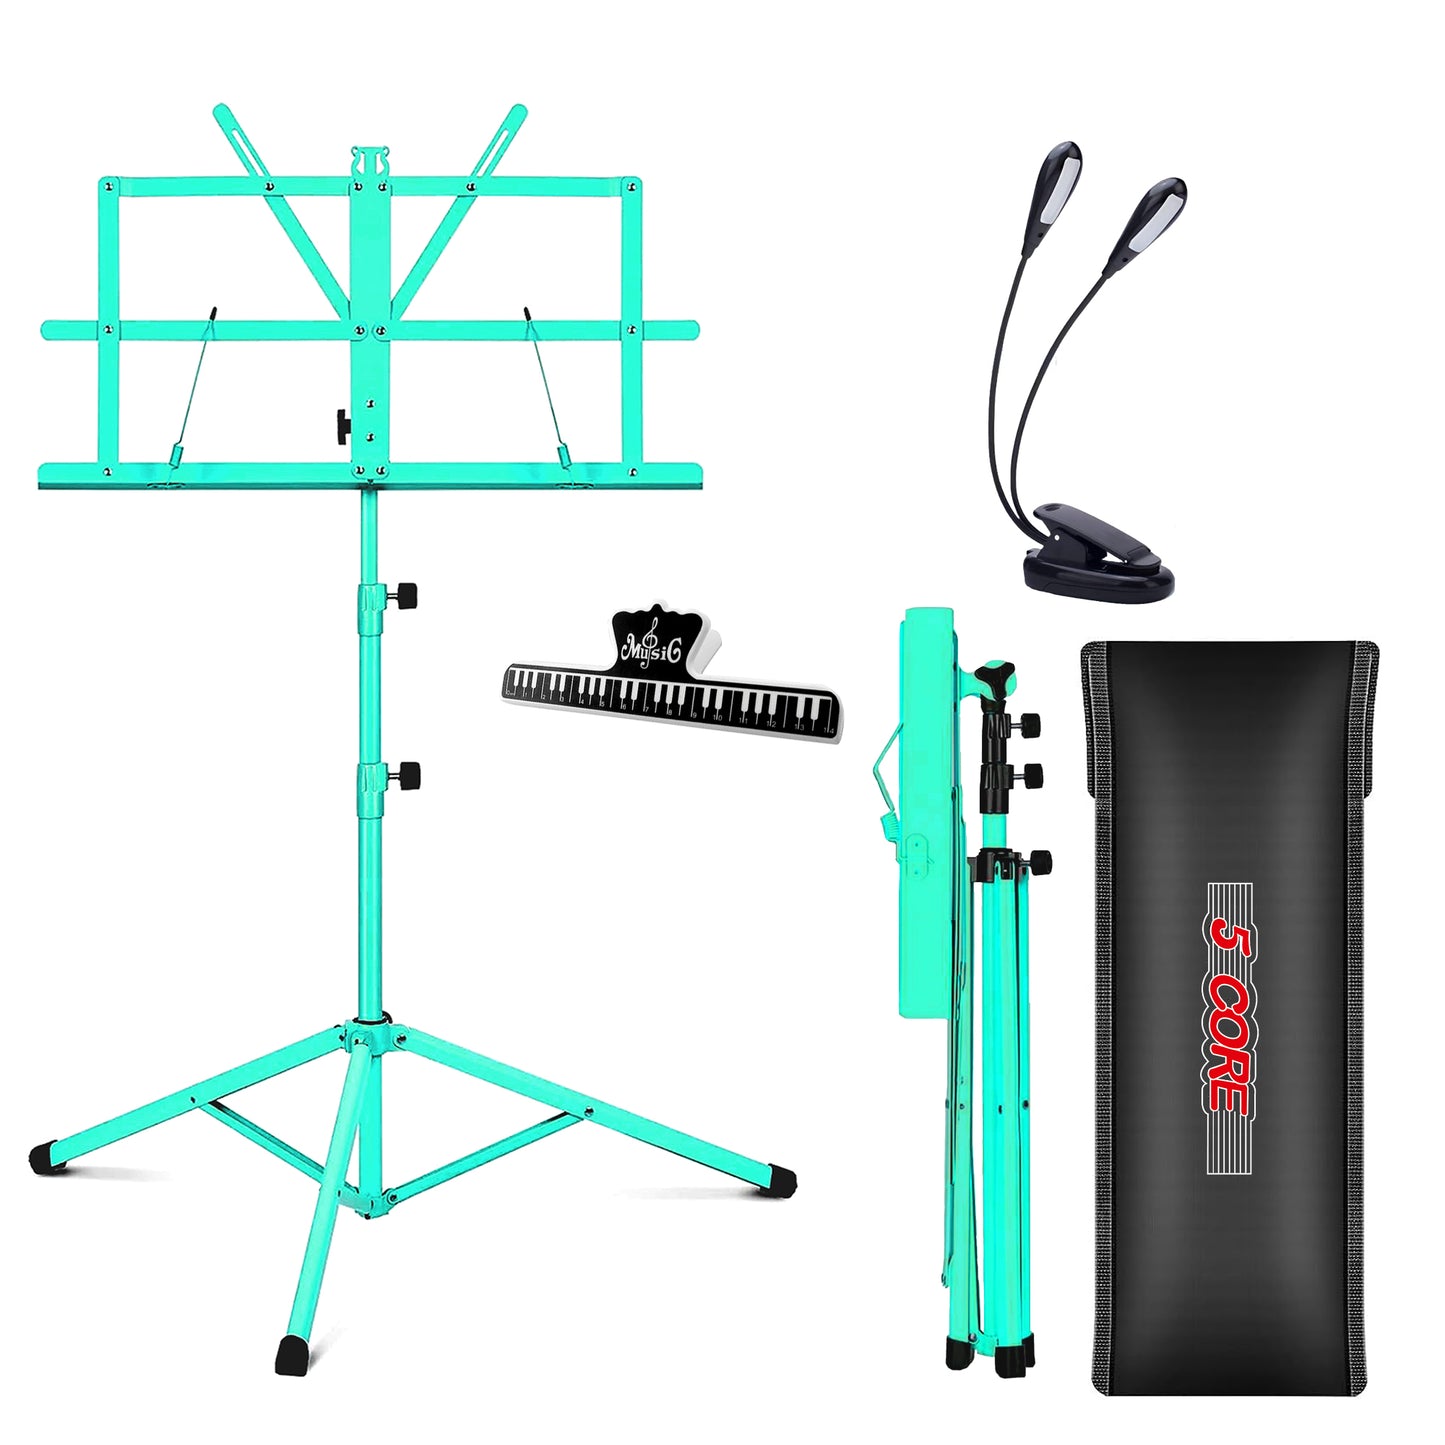 5 Core Music Stand, 2 in 1 Dual-Use Adjustable Folding Sheet Stand Green / Metal Build Portable Sheet Holder / Carrying Bag, Music Clip and Stand Light Included - MUS FLD GR